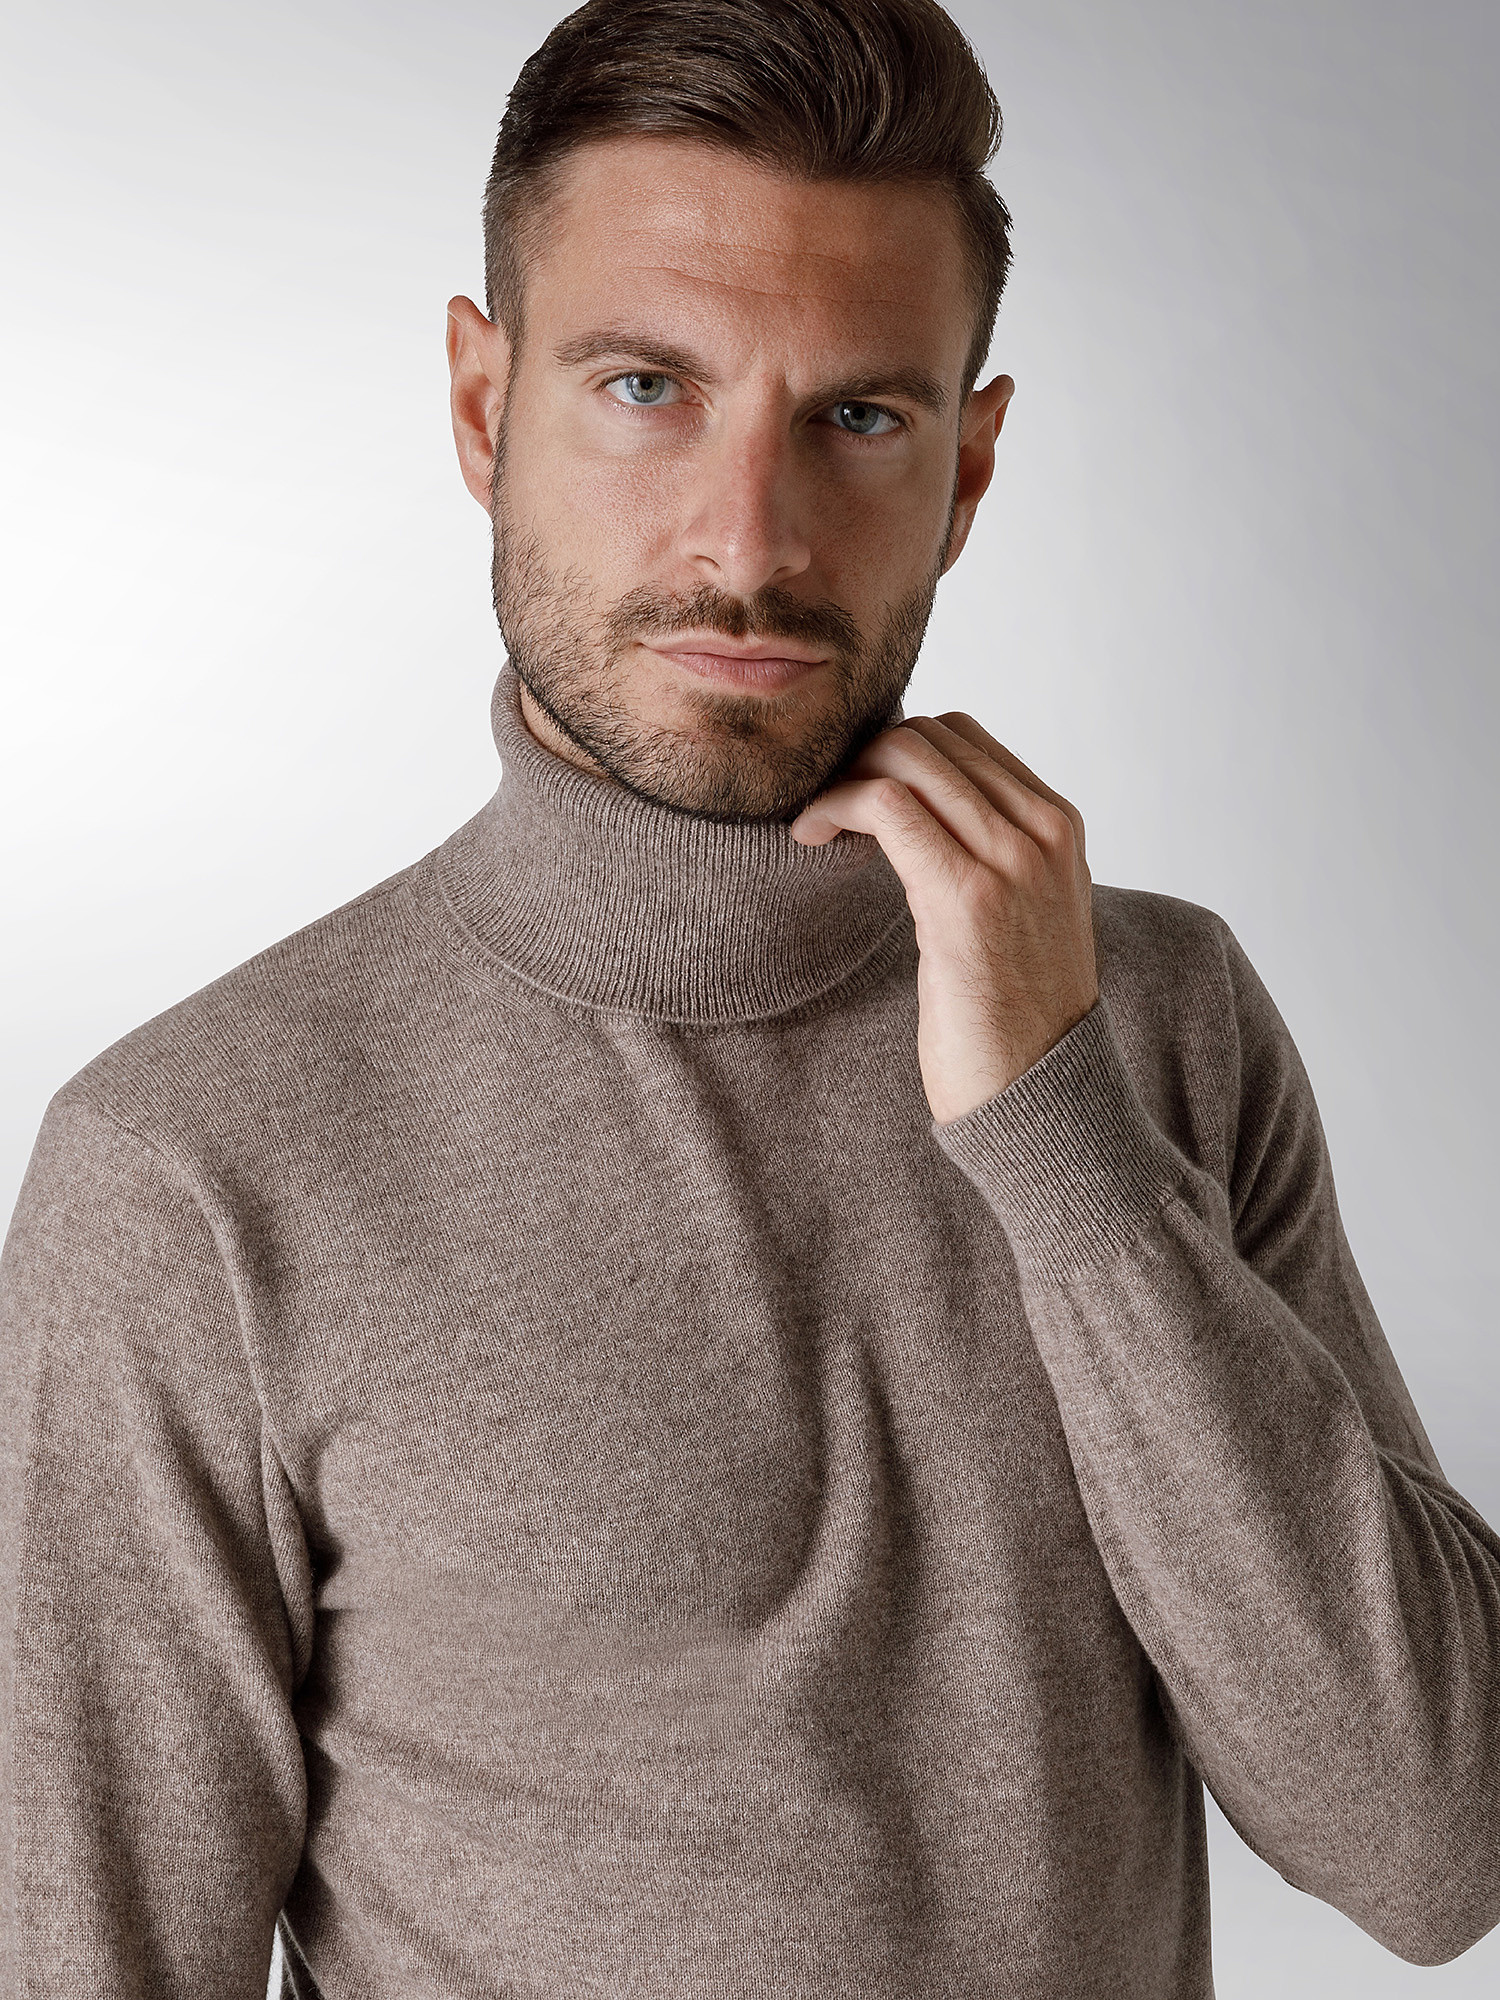 Coin Cashmere - Turtleneck in pure cashmere, Taupe Grey, large image number 3